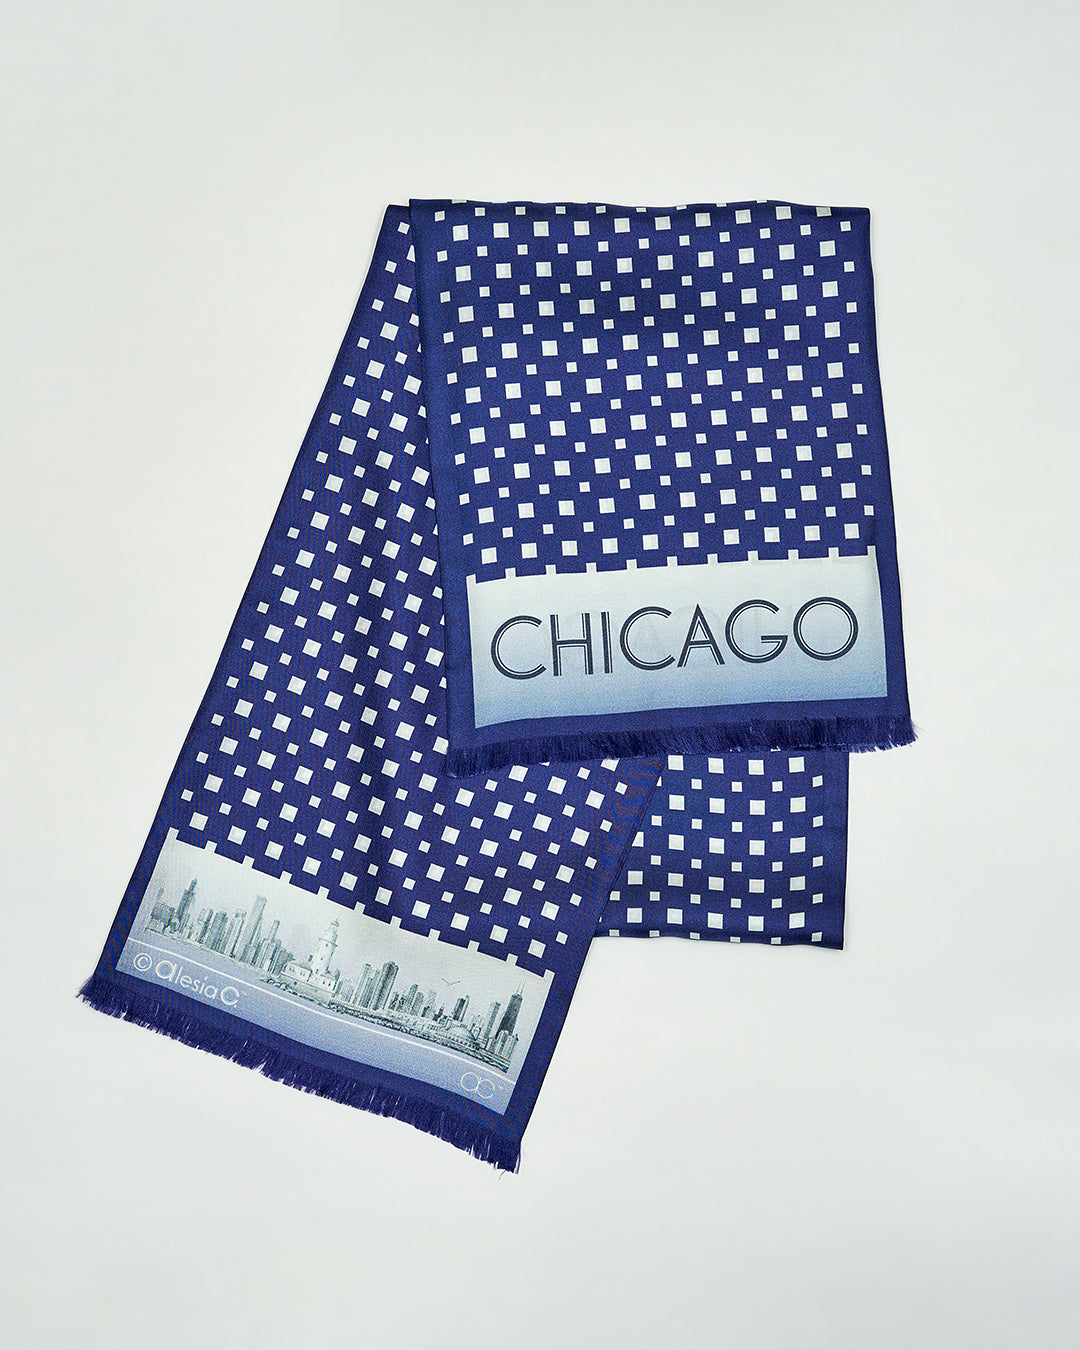 CHICAGO Skyline Art Pure Double 100% Long Silk Scarf Navy Blue White